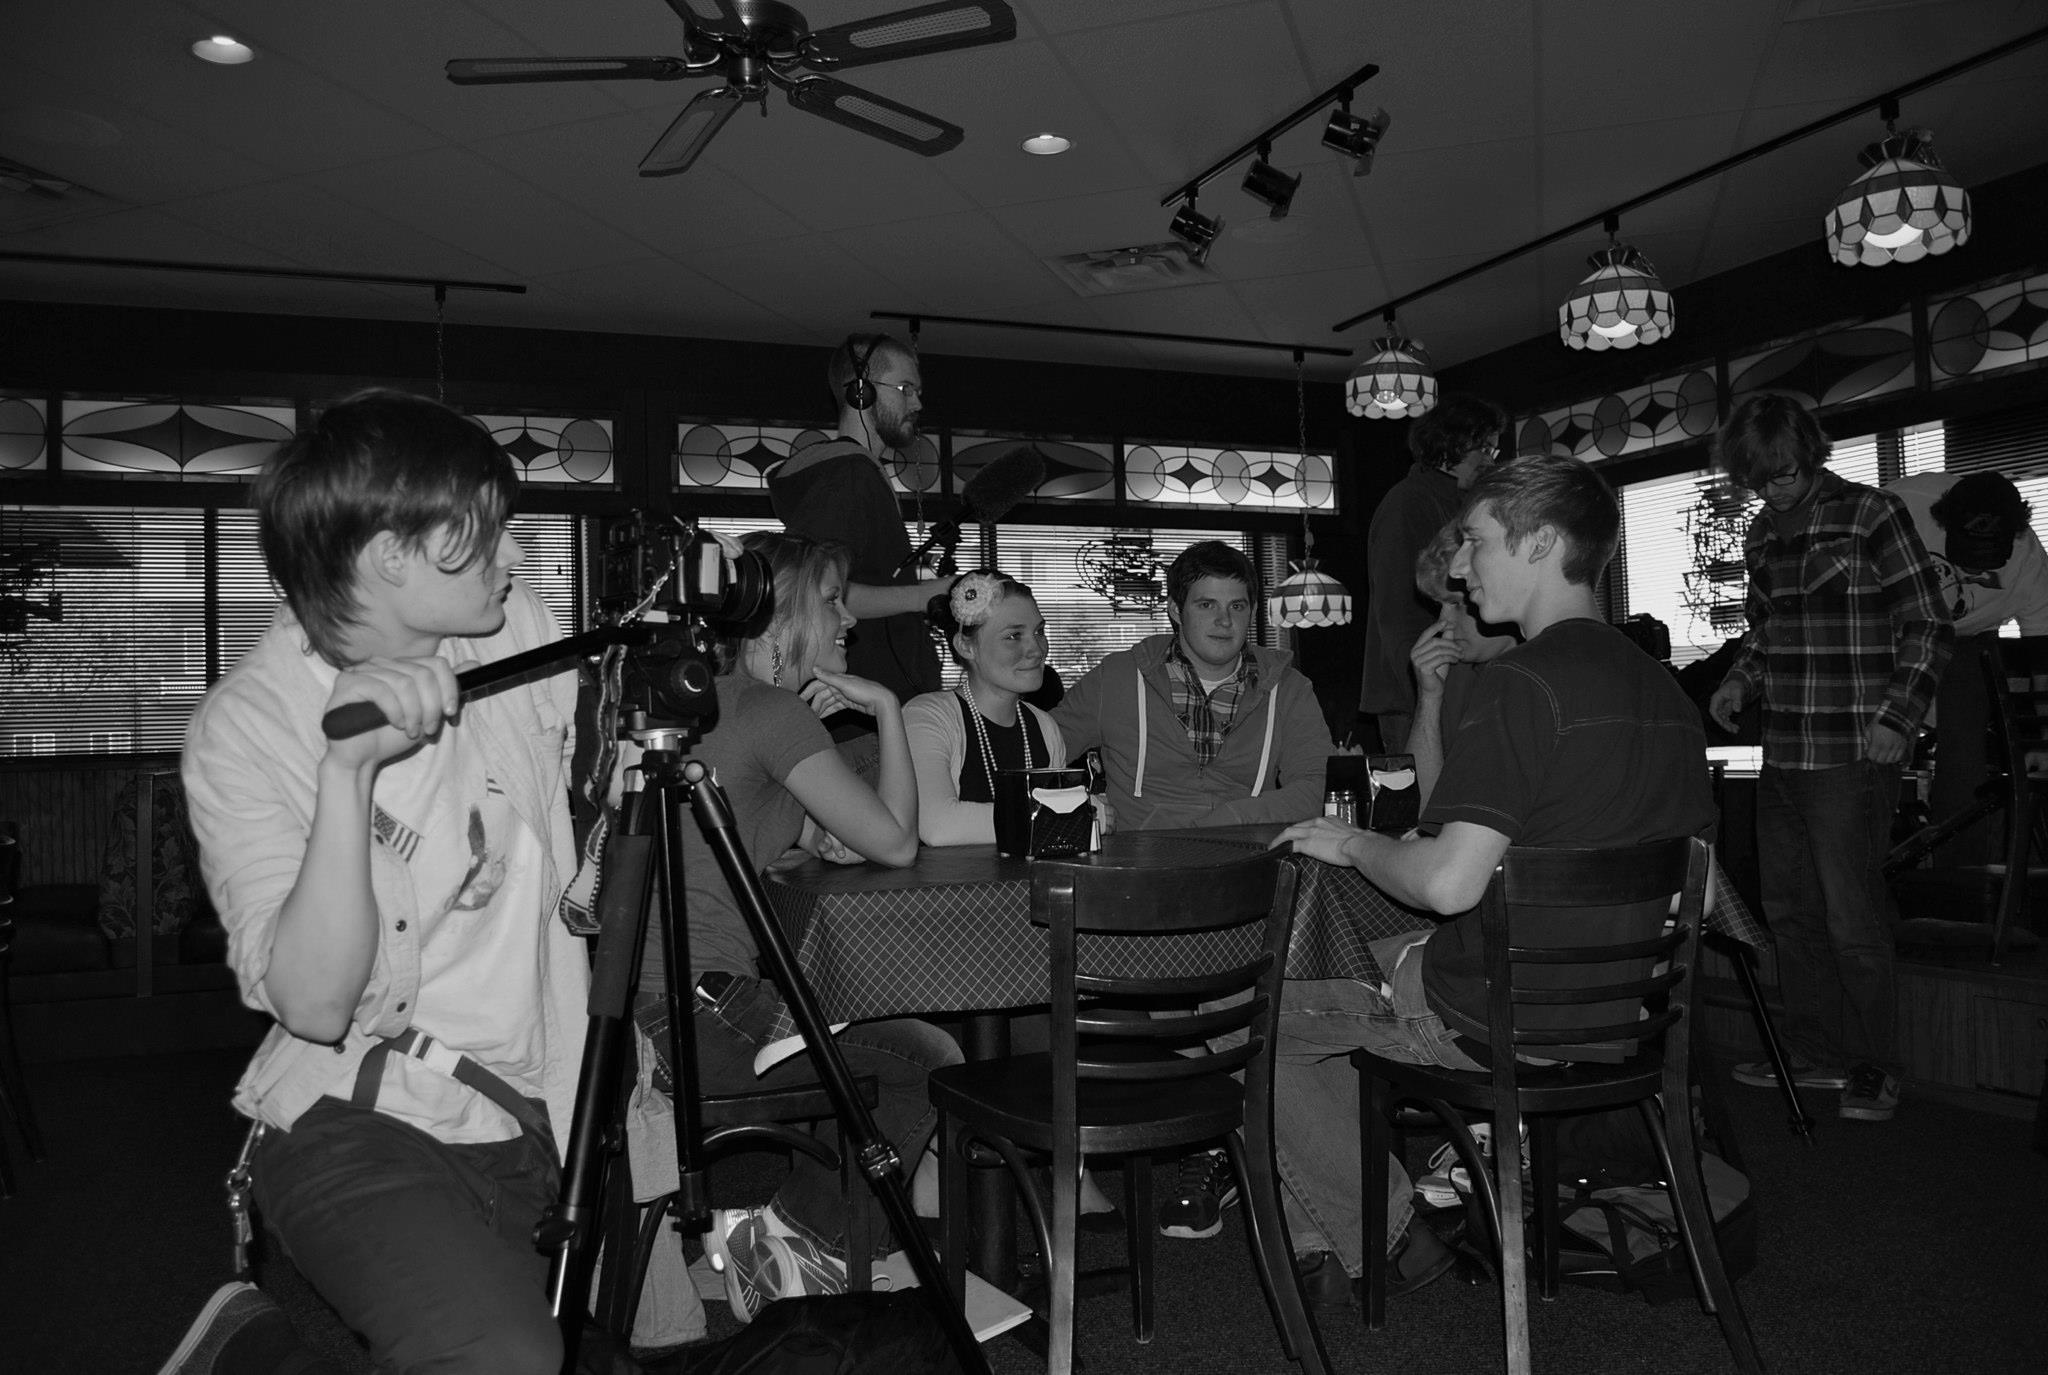  Behind the scenes of "This Loneliness" (photo courtesy of Michelle Chabot) 